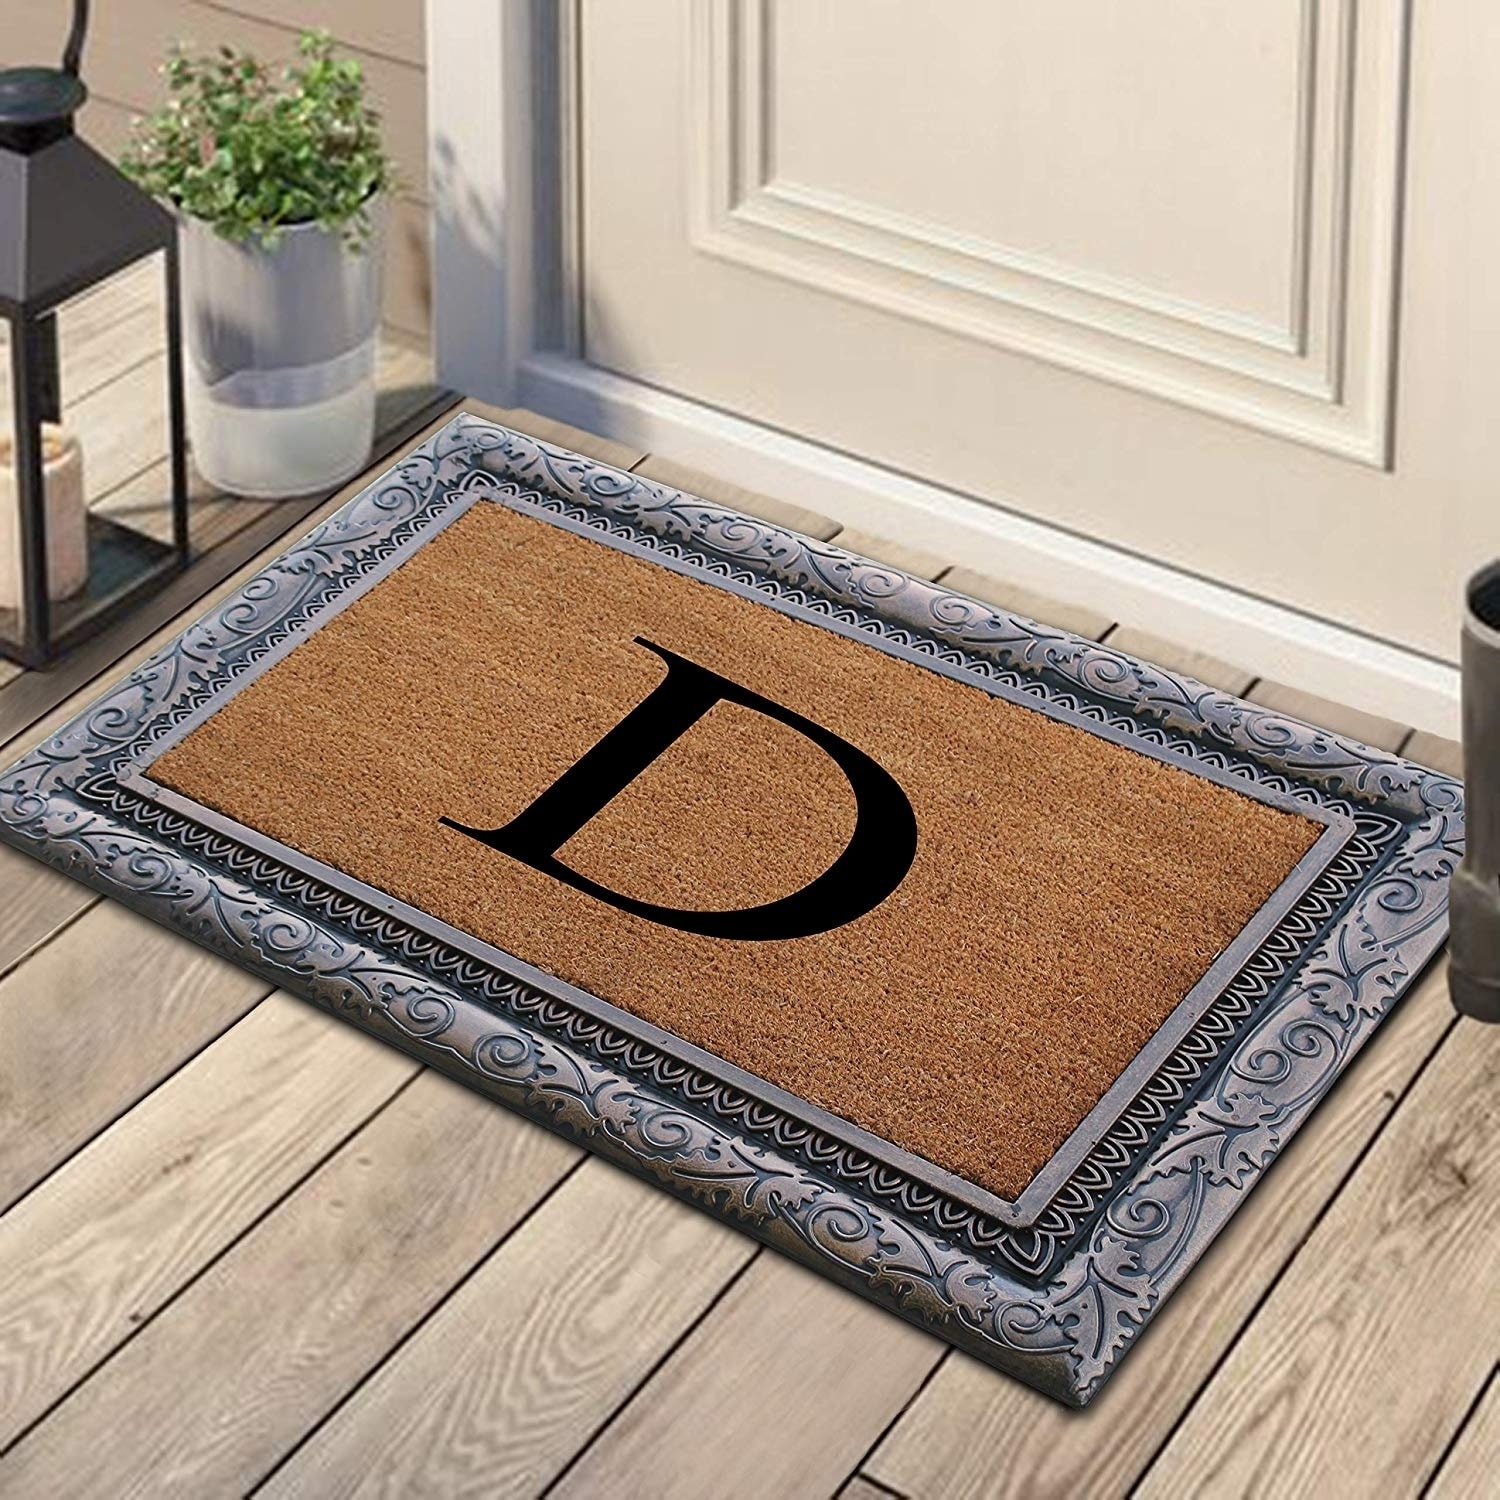 https://ak1.ostkcdn.com/images/products/29063003/A1HC-First-Impression-Rubber-and-Coir-Albena-24-X-36-Bronze-Finished-Heavy-Duty-Monogrammed-Doormat-6bb7e994-5680-410b-9abc-534e21d52c64.jpg